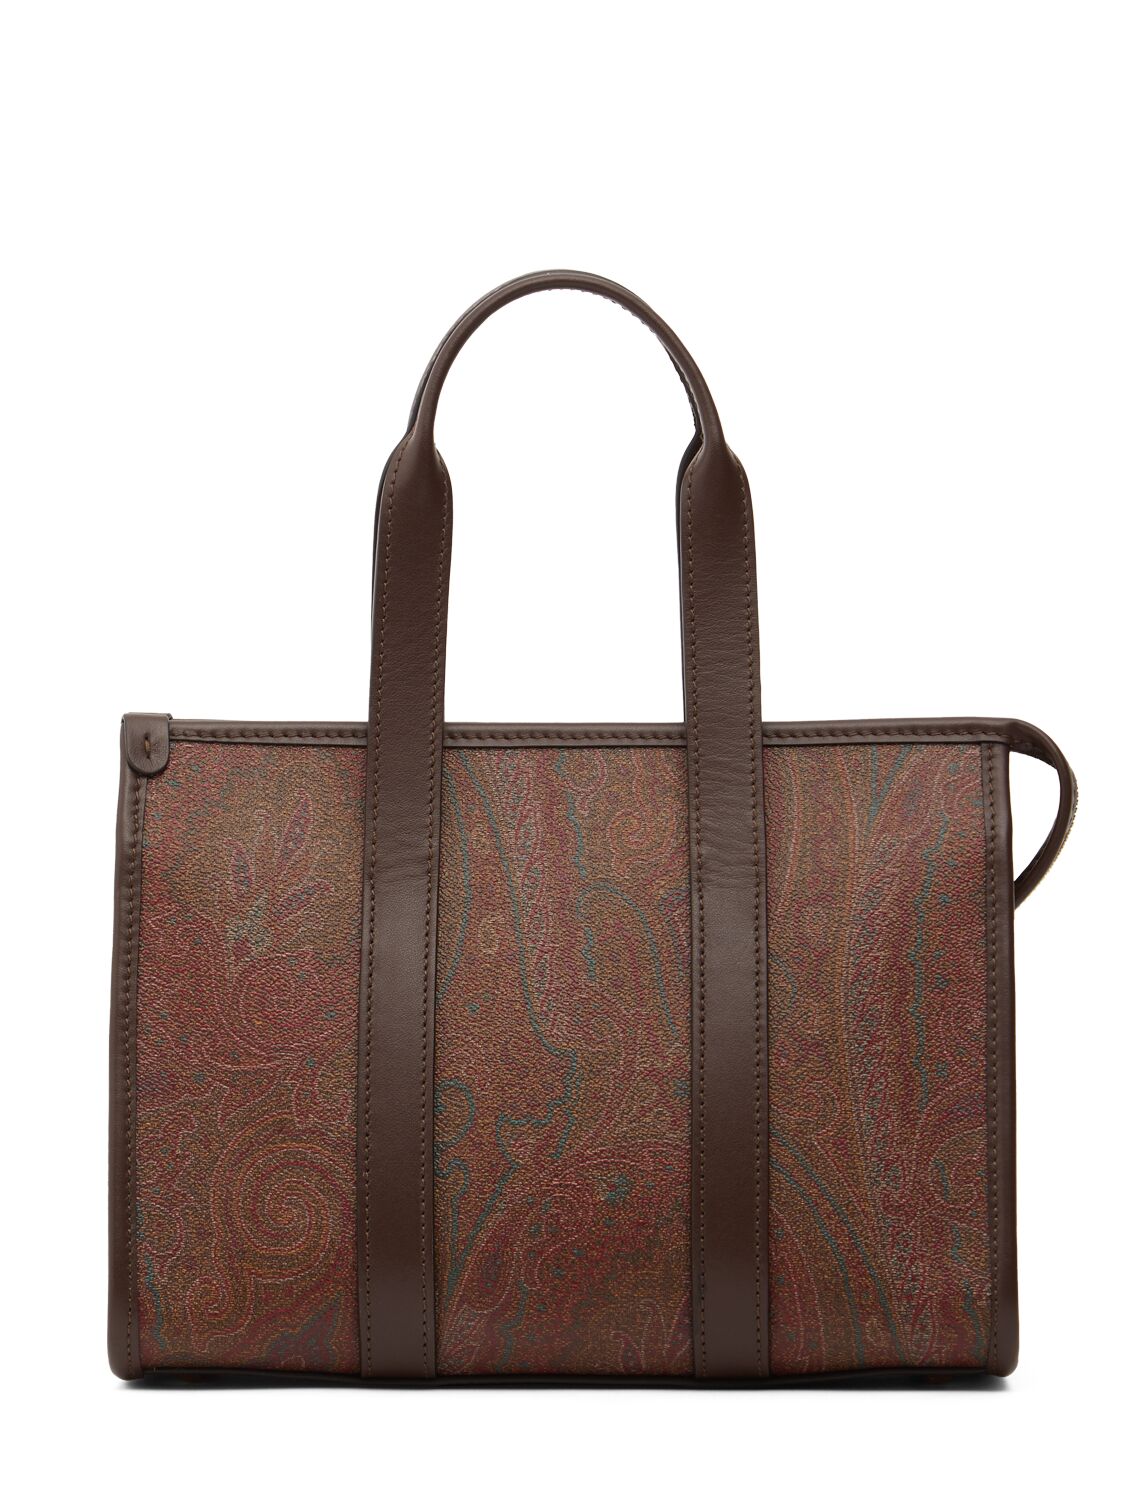 Etro Small Bauletto Arnica Top Handle Bag In Brown